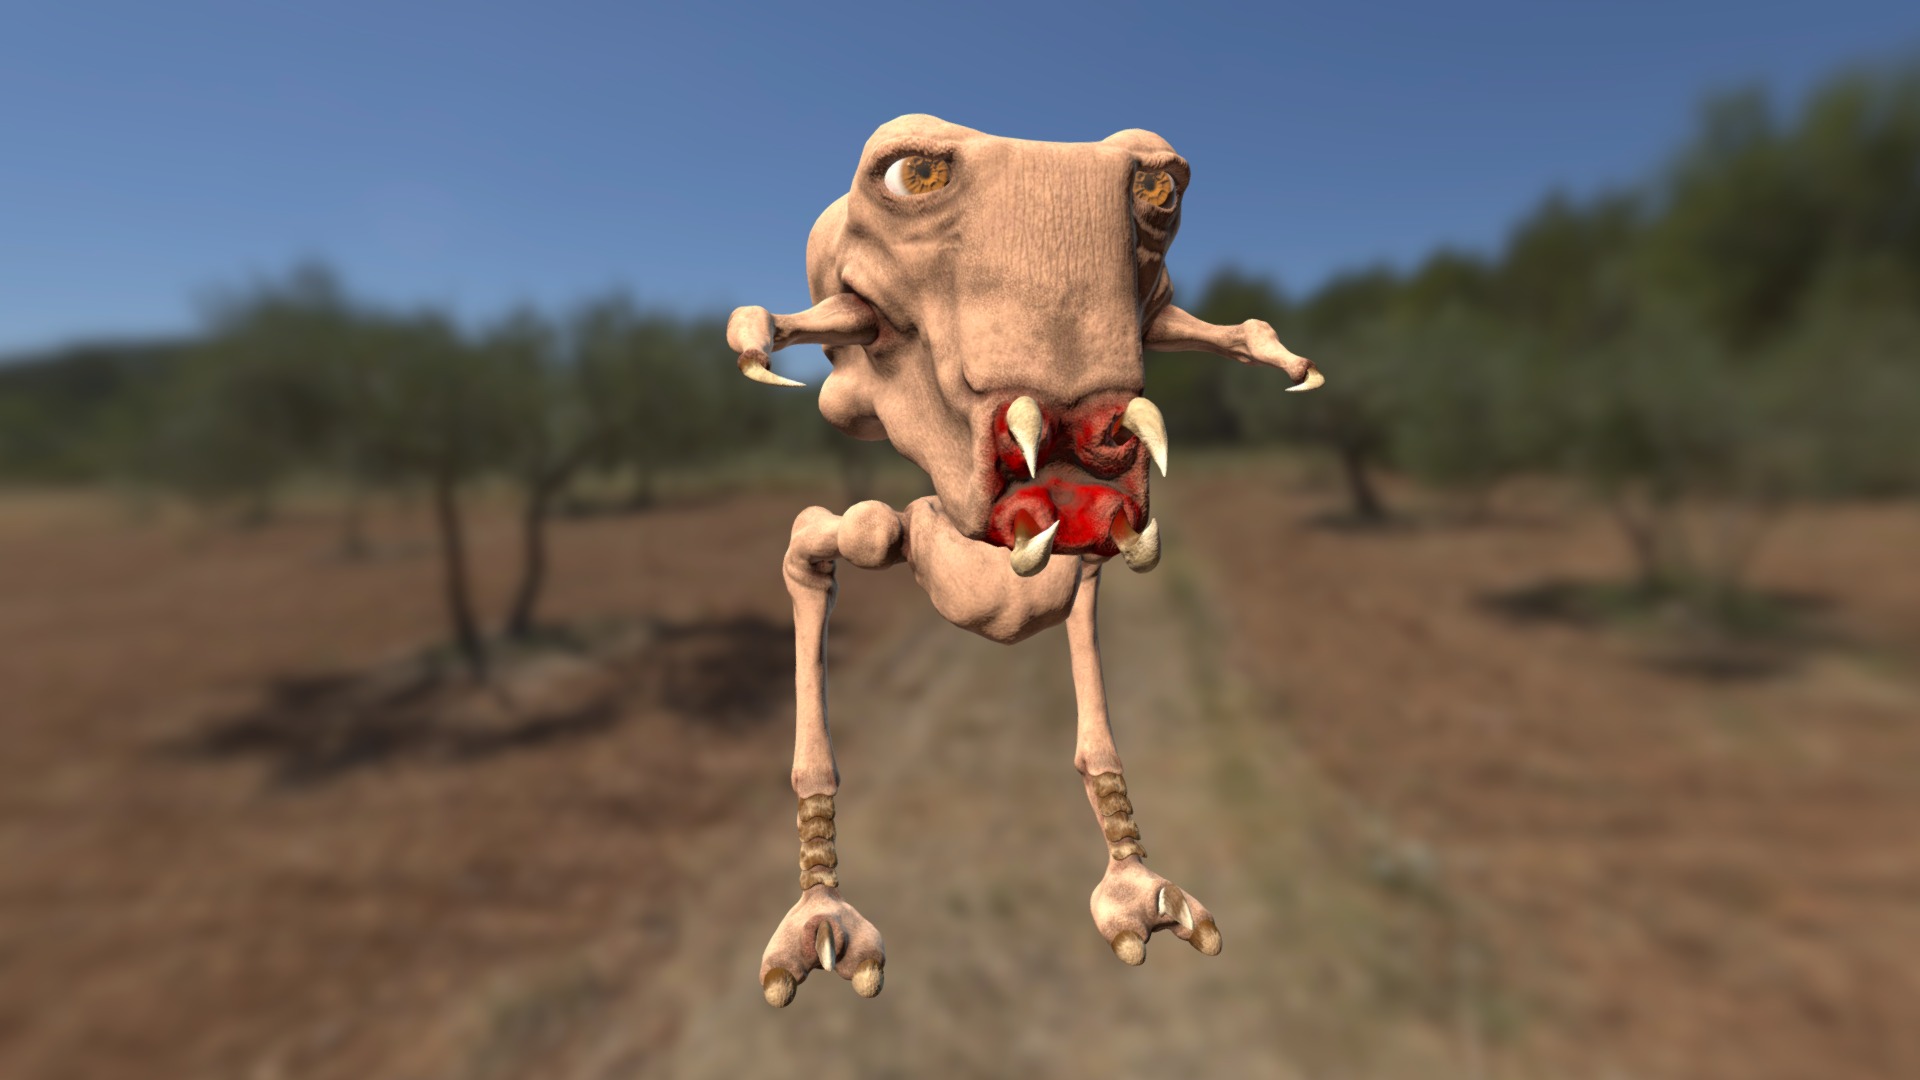 3D model AS TS Awful Monster Skeleton - This is a 3D model of the AS TS Awful Monster Skeleton. The 3D model is about a dinosaur running on a dirt road.